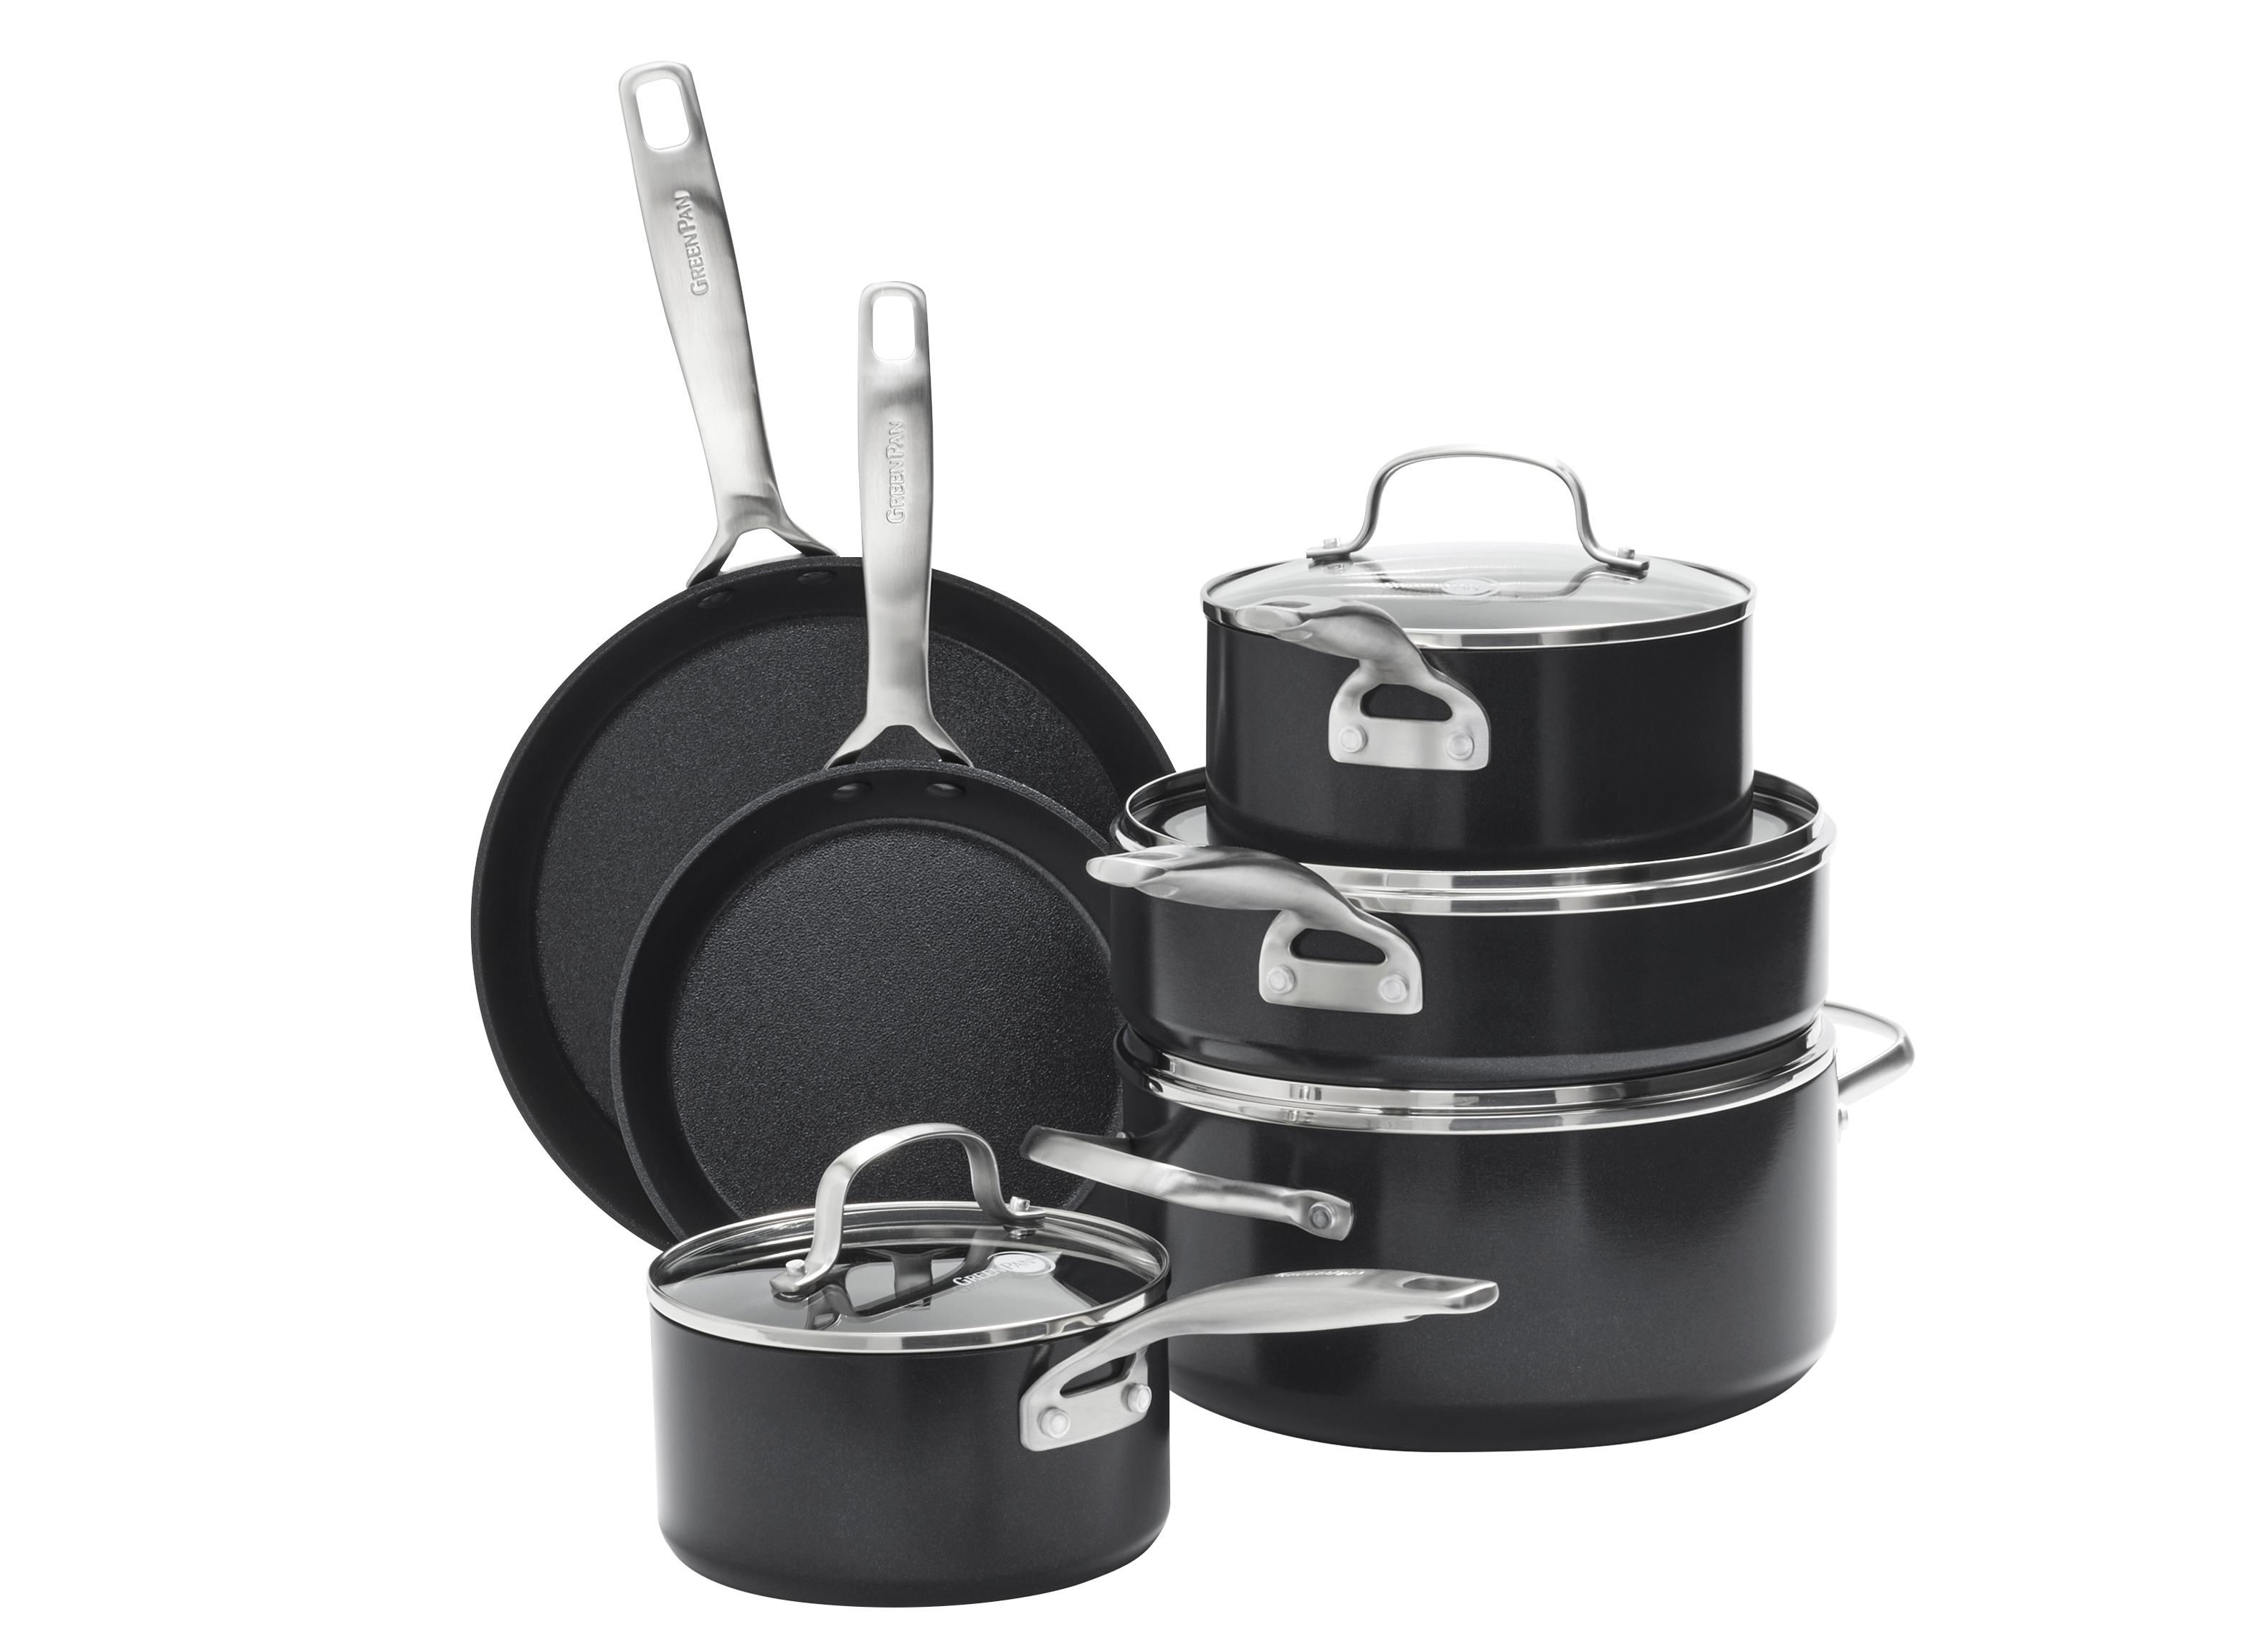 https://crdms.images.consumerreports.org/prod/products/cr/models/402090-cookware-sets-nonstick-greenpan-searsmart-ceramic-10015651.png